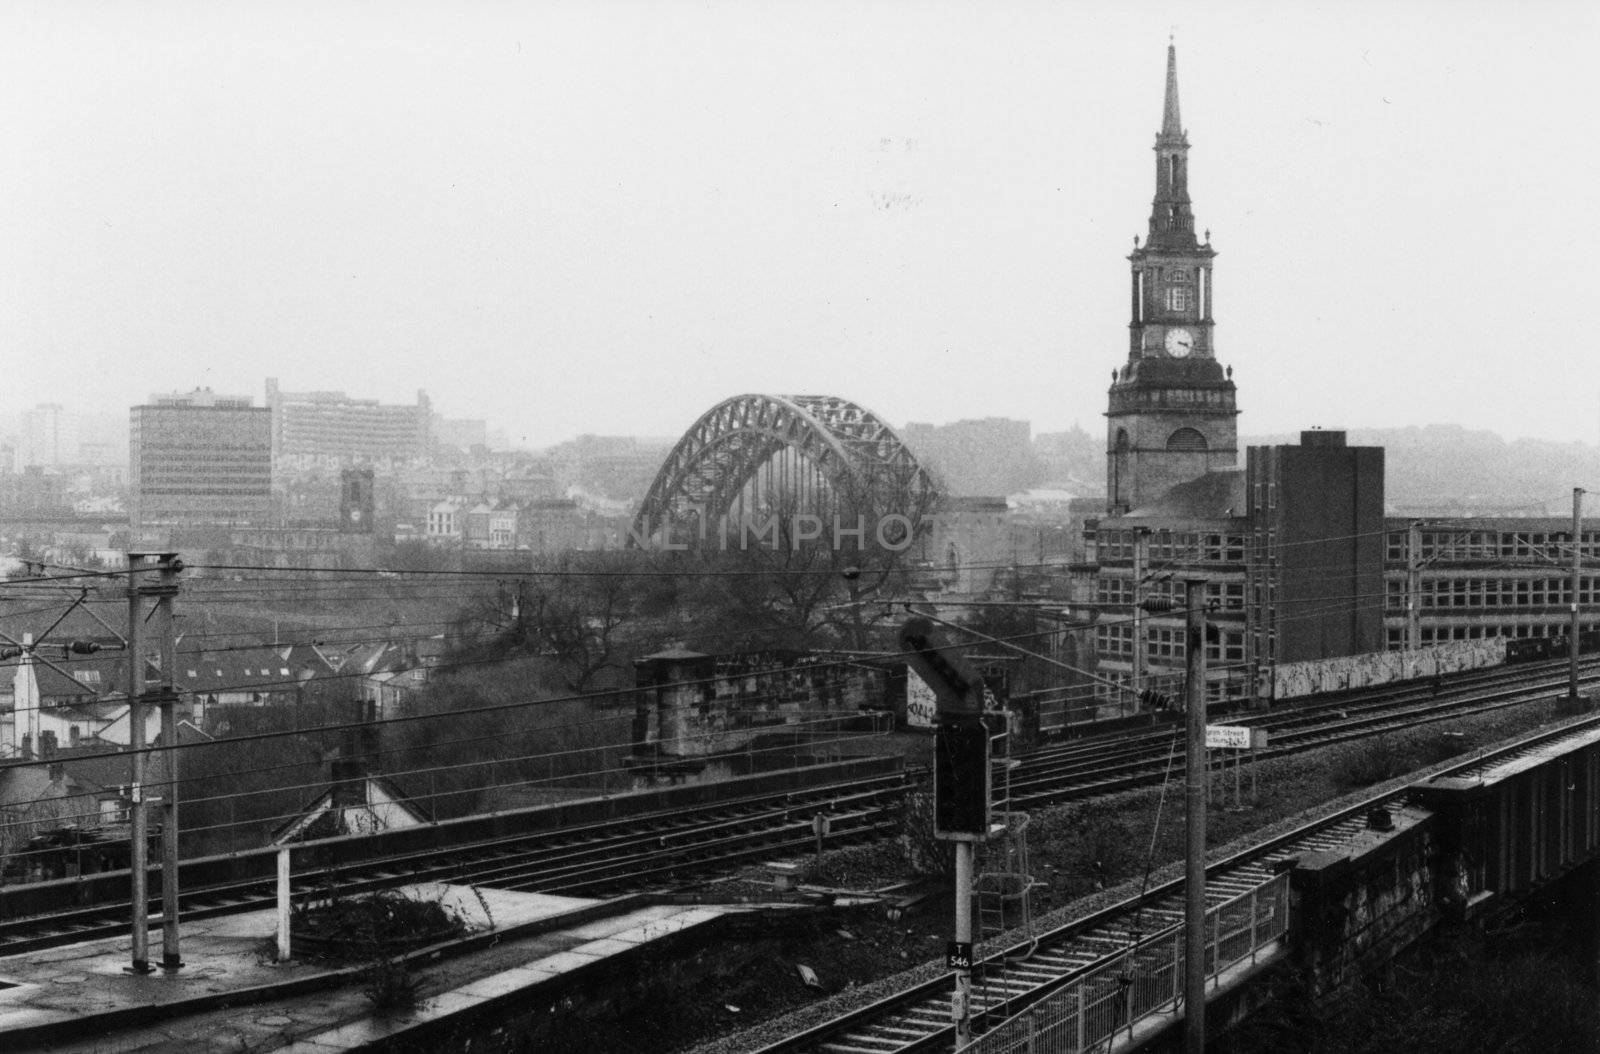 A view of Newcastle.